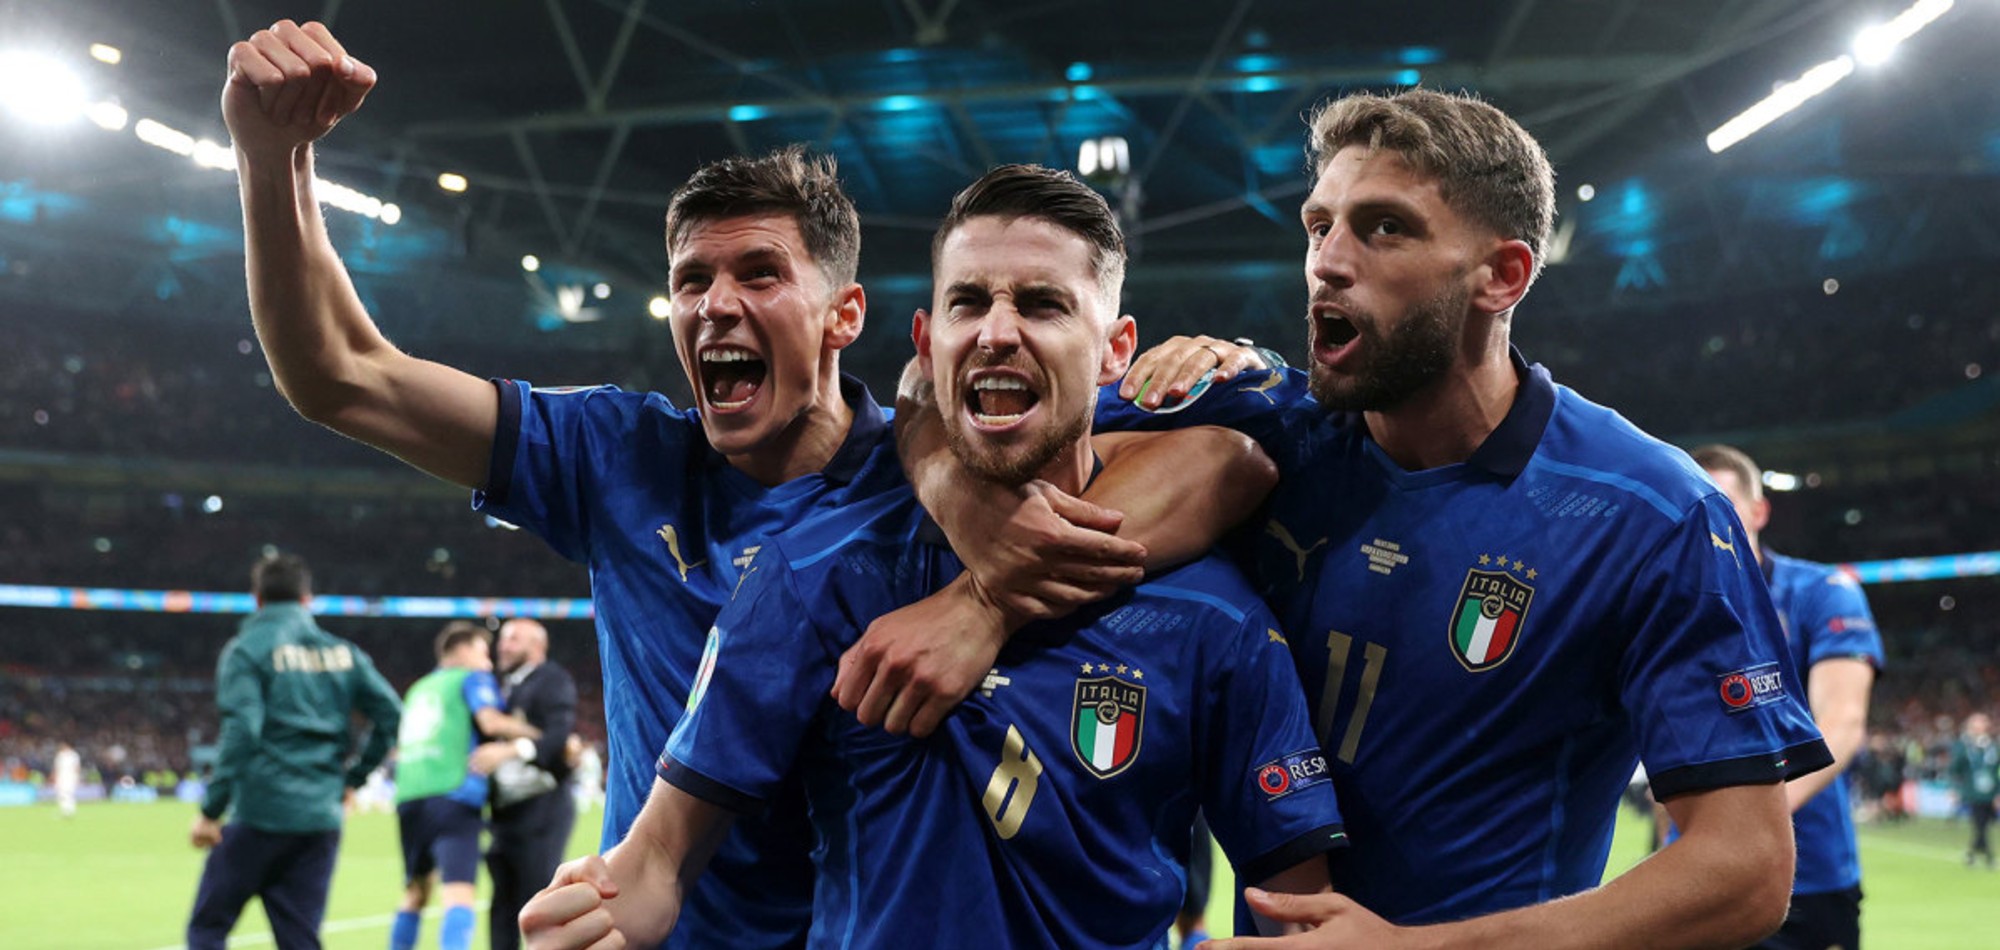 Euro 2020: Italy beat Spain on penalties to reach final